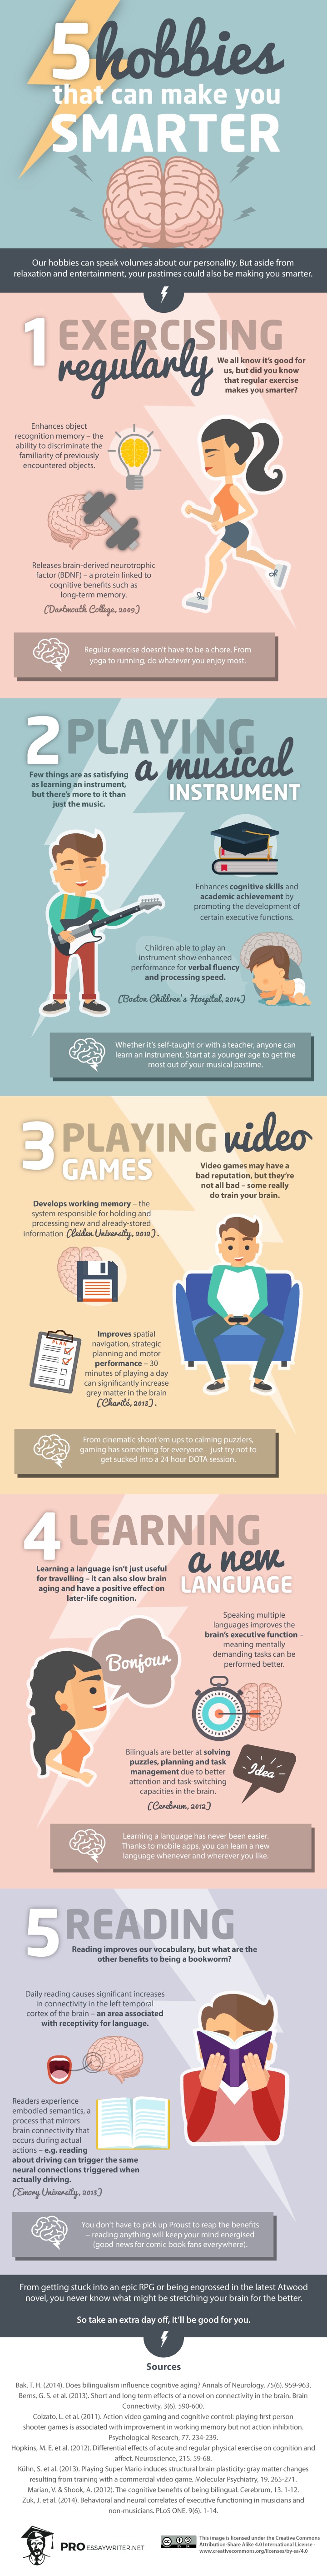 5 Hobbies That Can Make You Smarter Infographic